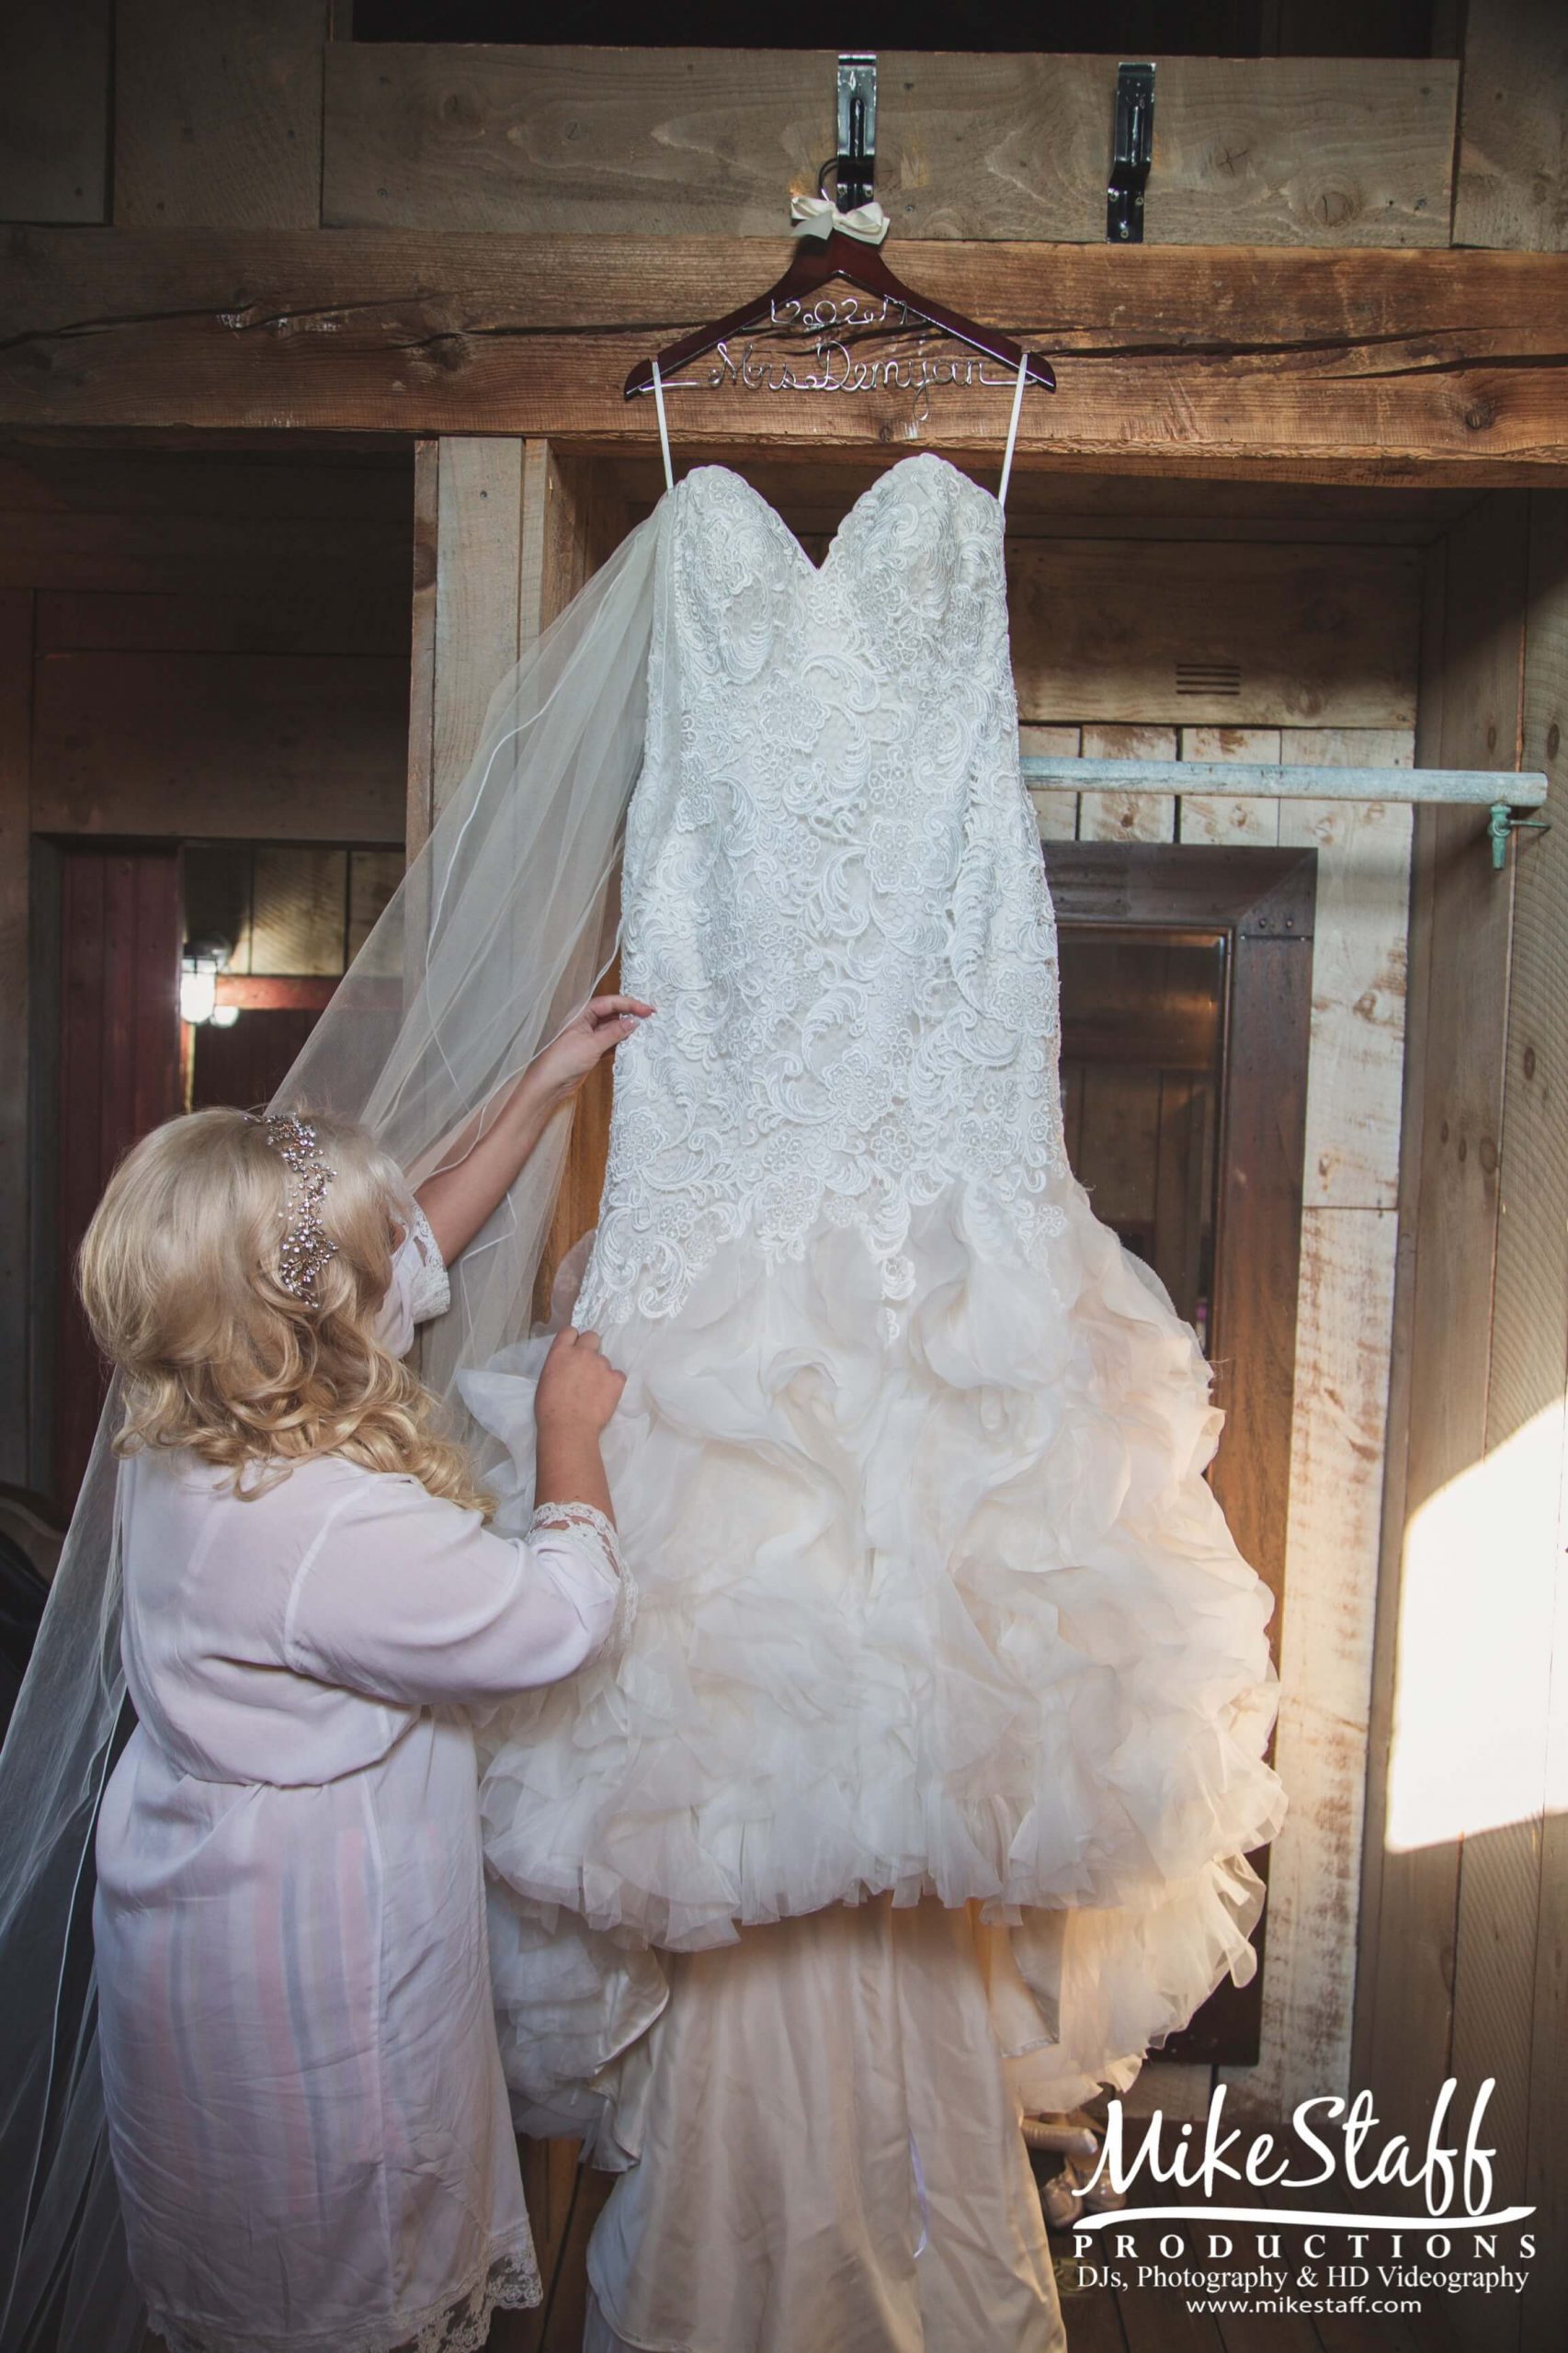 bride looking at dress hanging in barn